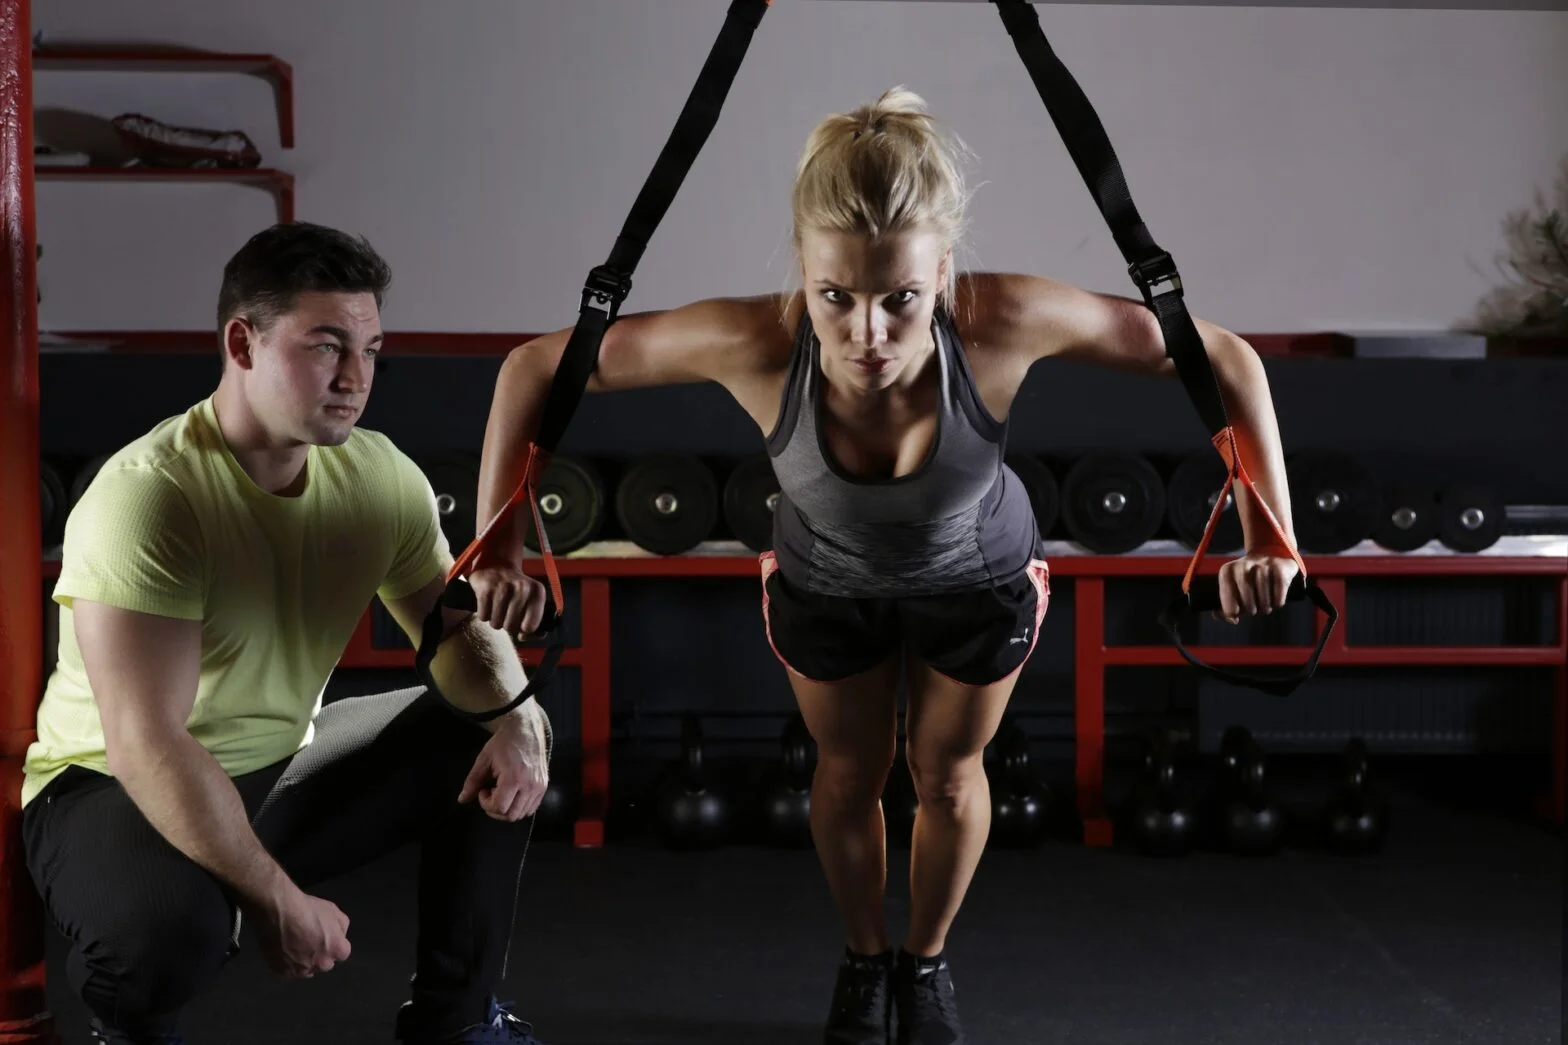 Fitness Guide: How to Find the Best Personal Trainer for You